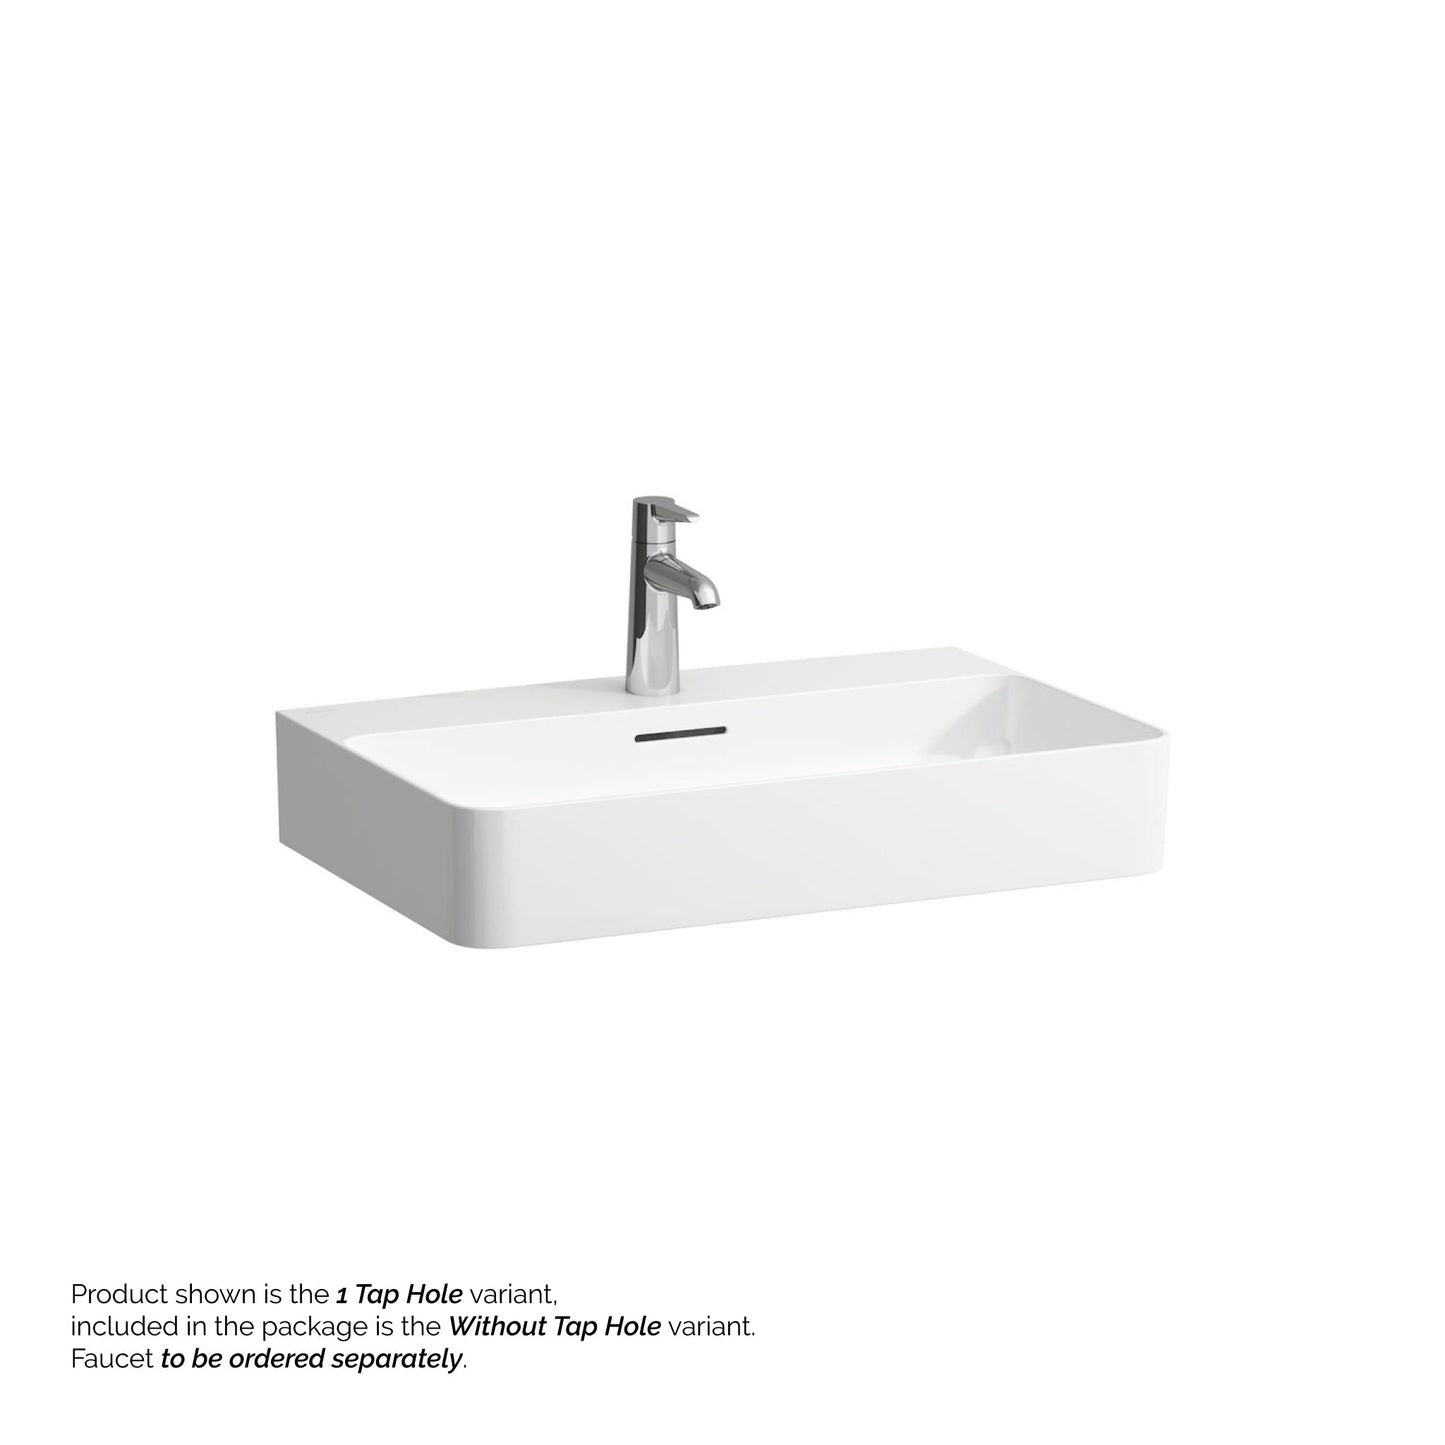 Laufen Val 26" x 17" Matte White Ceramic Countertop Bathroom Sink Without Faucet Hole